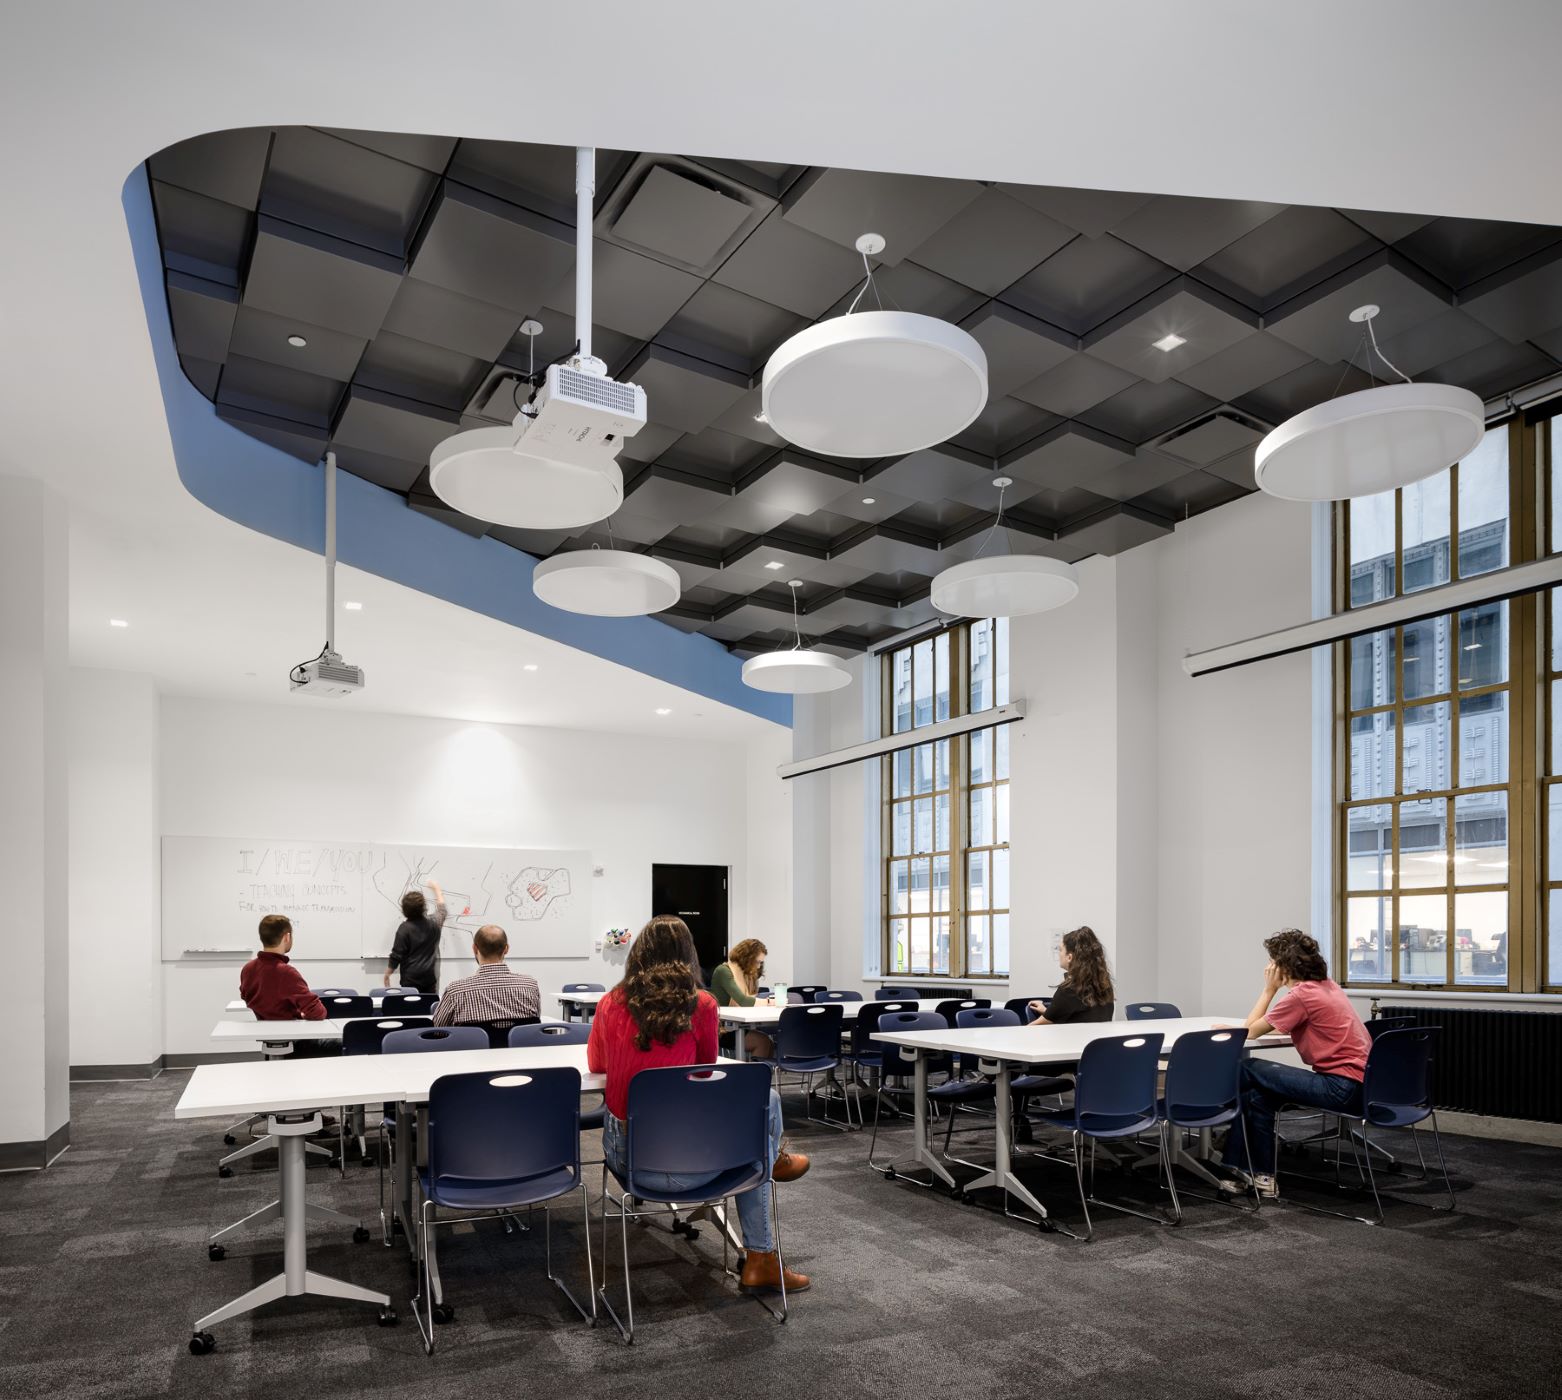 students studying in a white room with a cube style ceiling